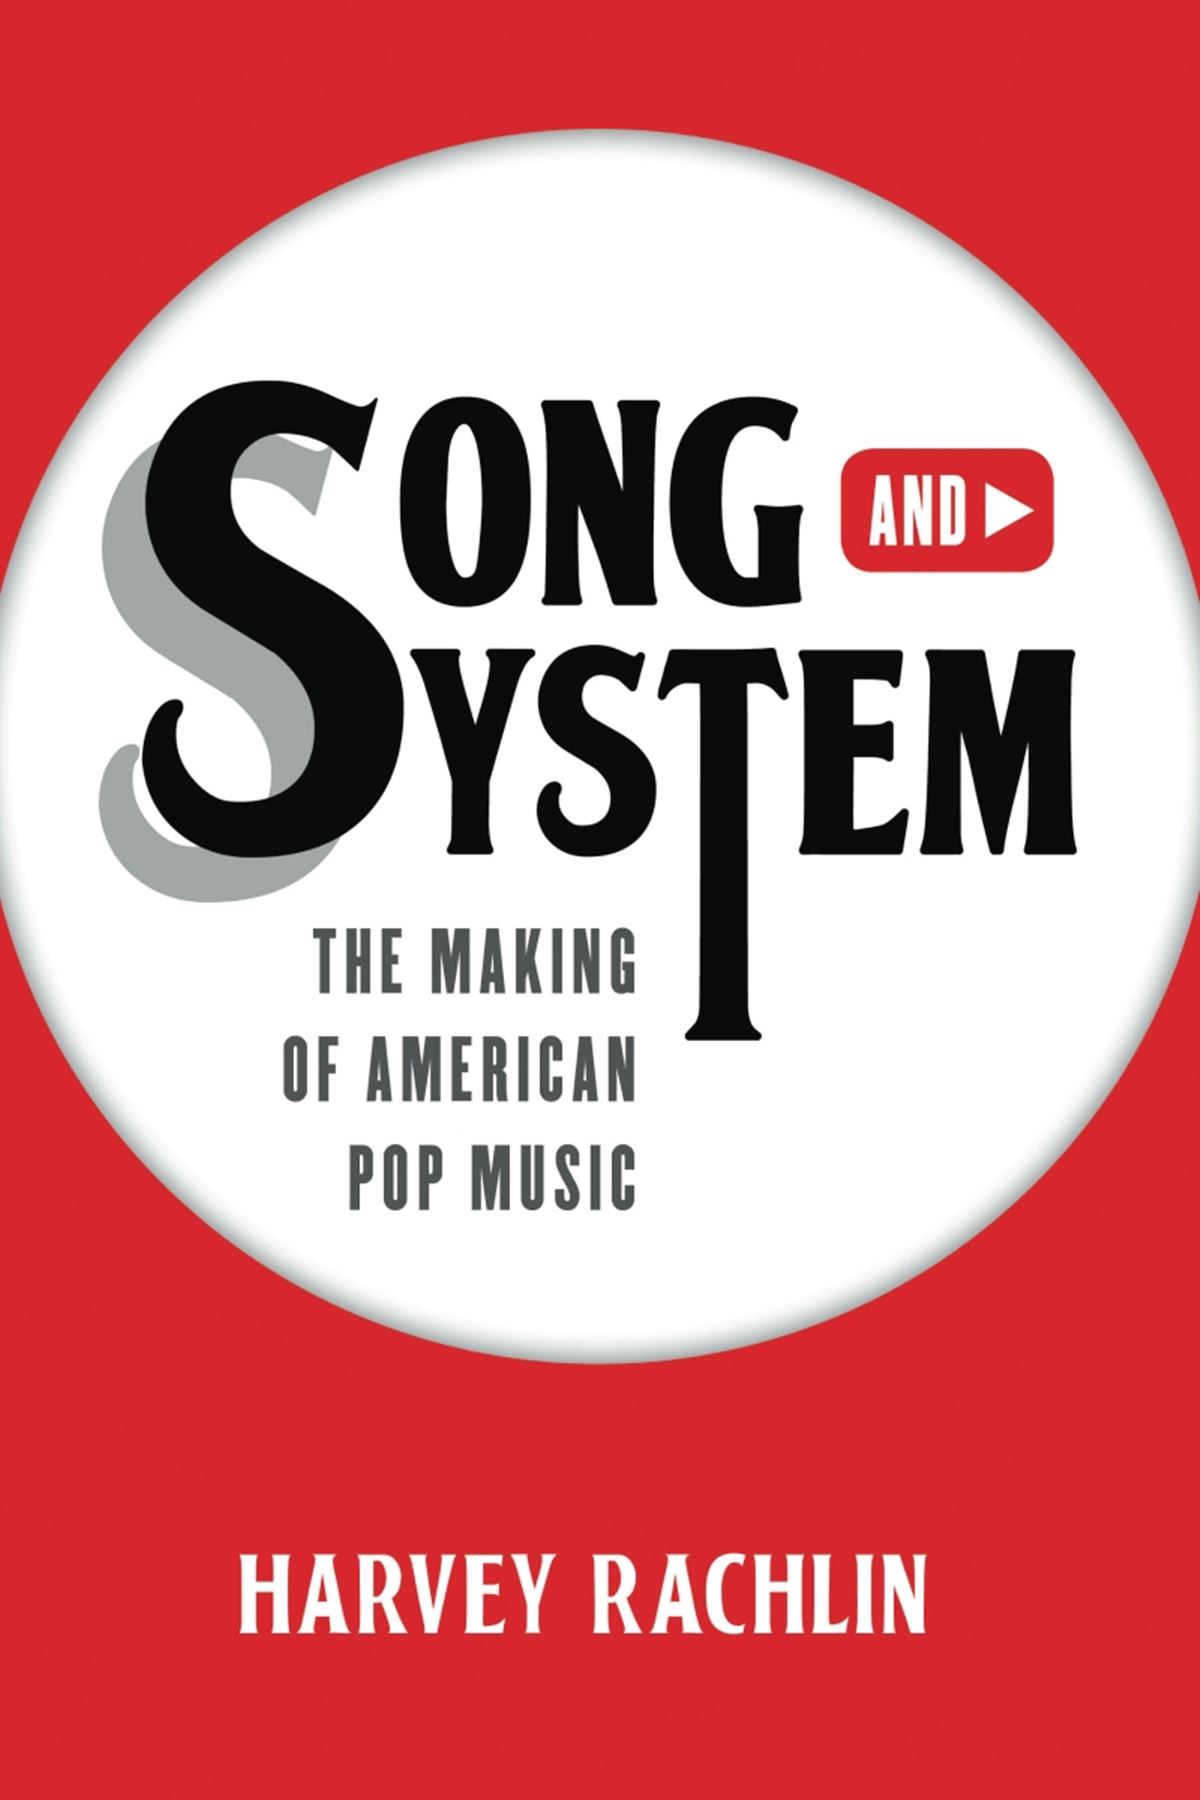 Song and System: Reference Books: History